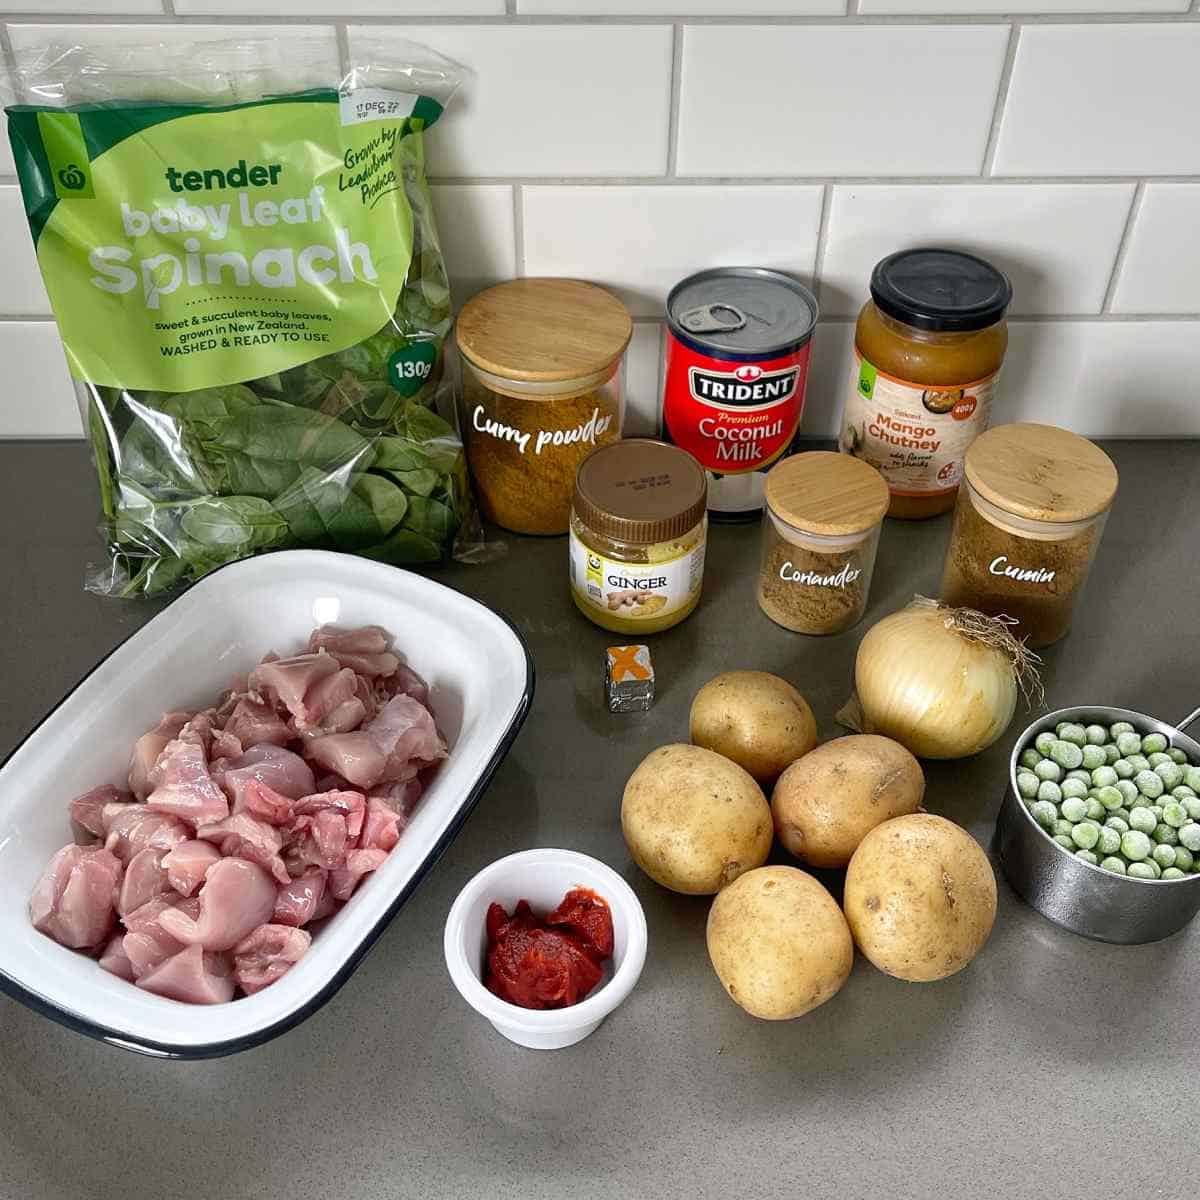 The ingredients for Chicken and Potato Curry on a grey bench.